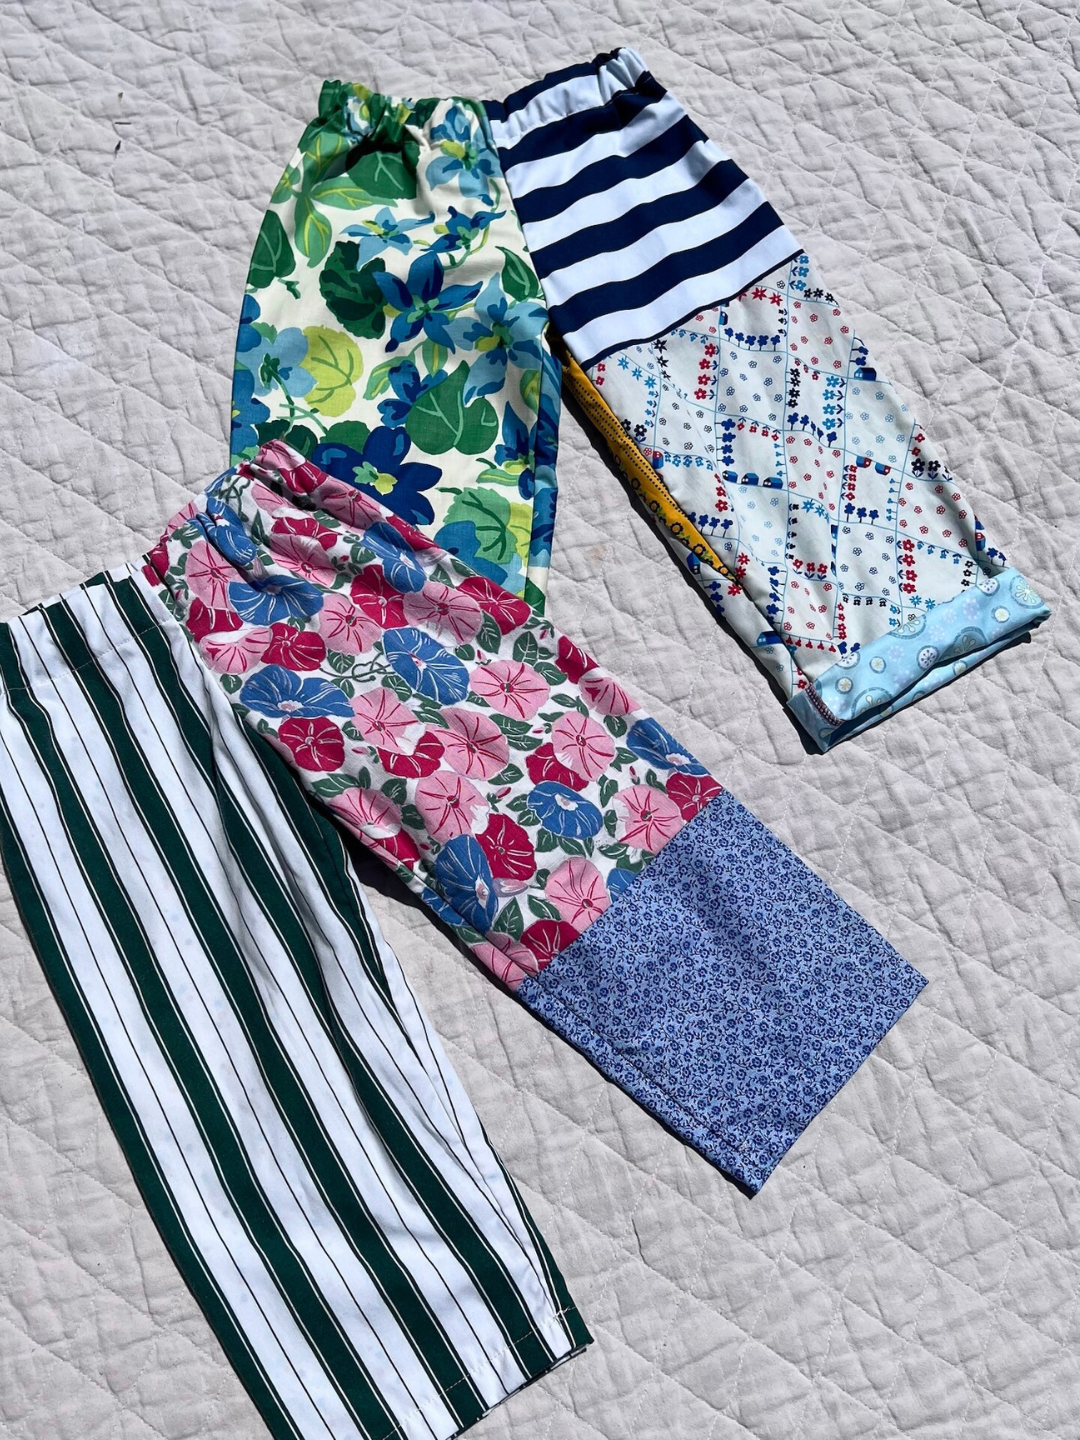 Two pairs of kids' patchwork pants laid on a quilt. One pair with green and white stripes on left leg, pink and blue flowers on the right; the other with blue and green floral pattern on the left leg, stripes and diamonds on the right